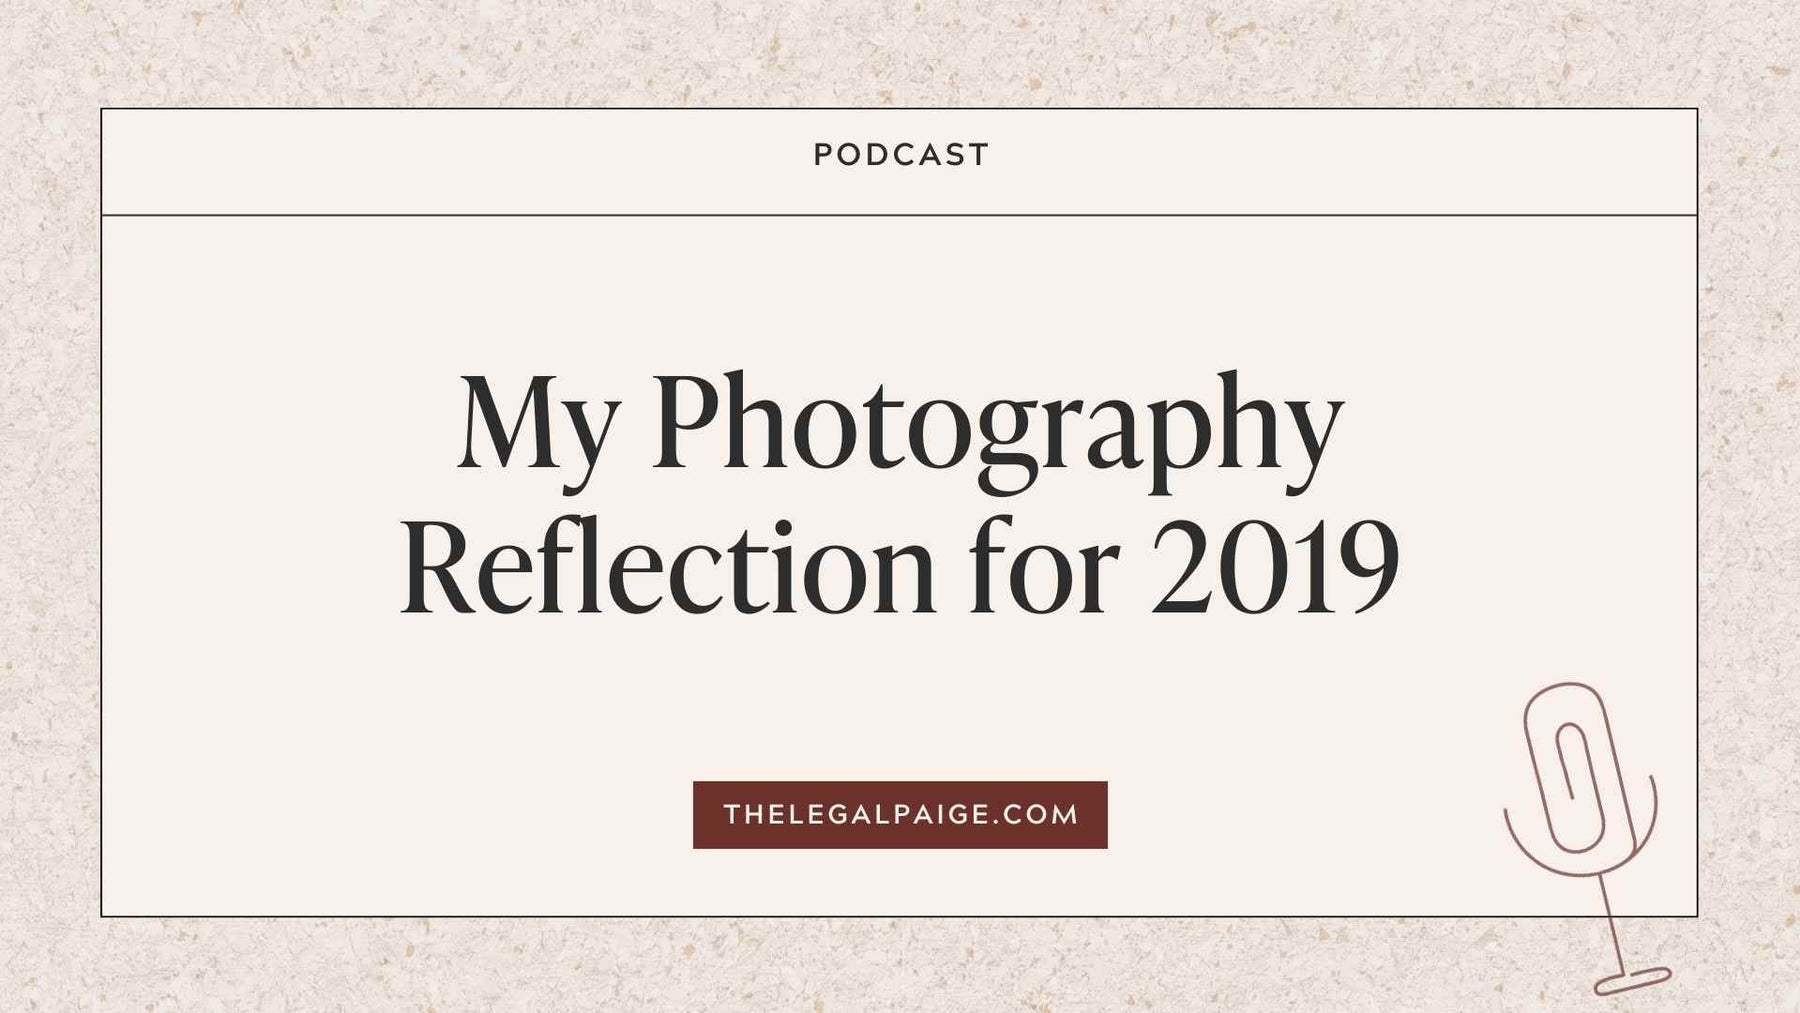 Episode 22: My Photography Reflection for 2019